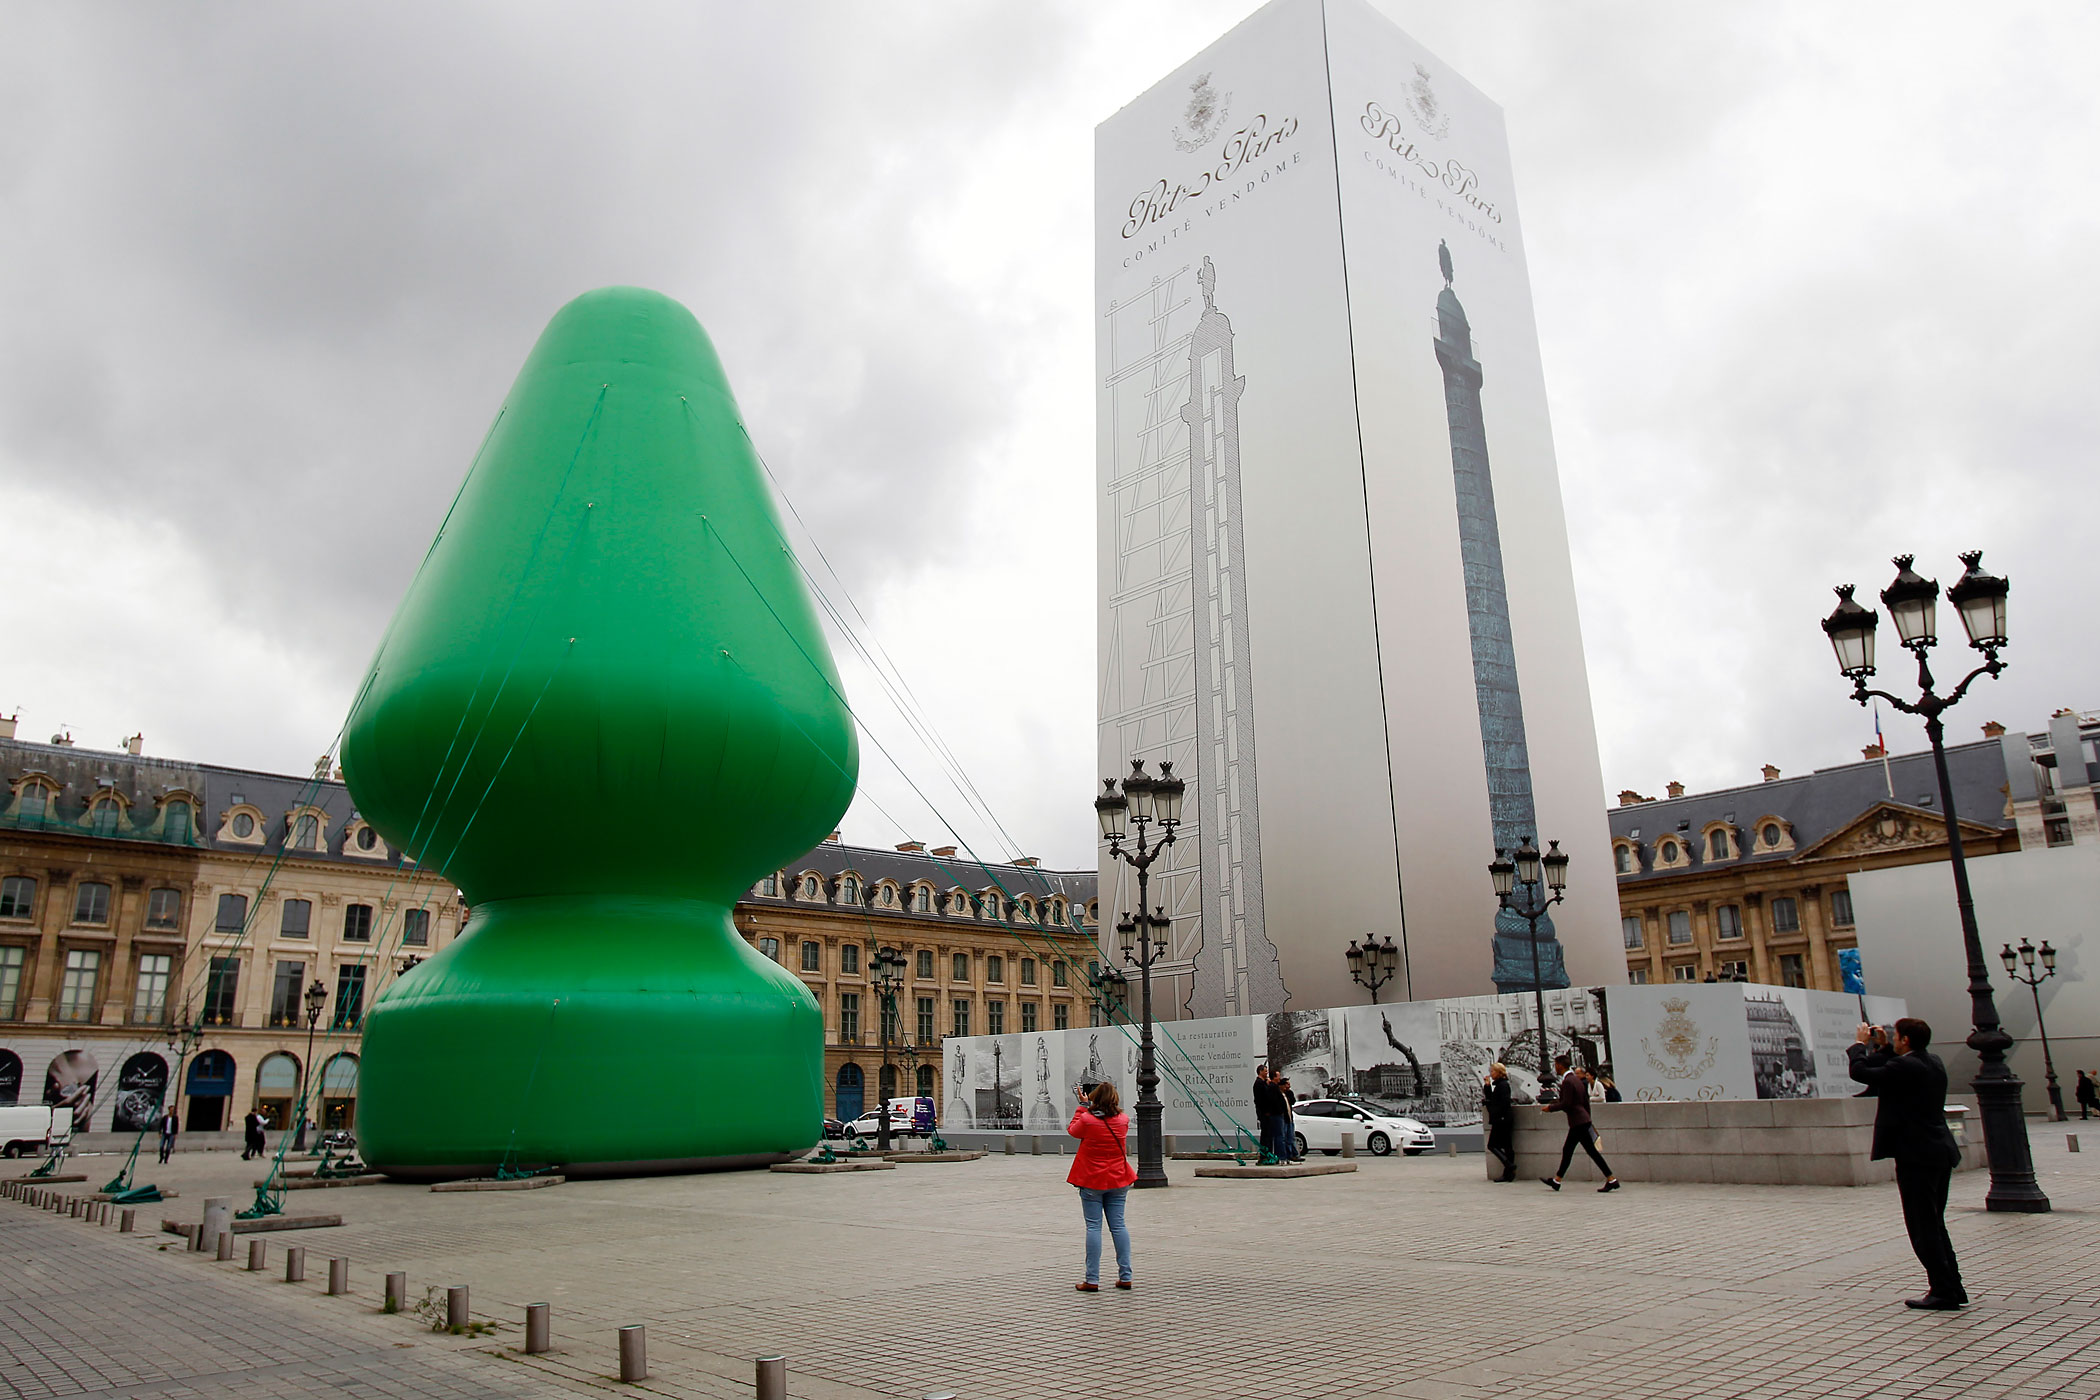 Paul McCarthy's artwork called "Tree" is seen at Place Vendome on October 16 in Paris, France. (Chesnot—Getty Images)